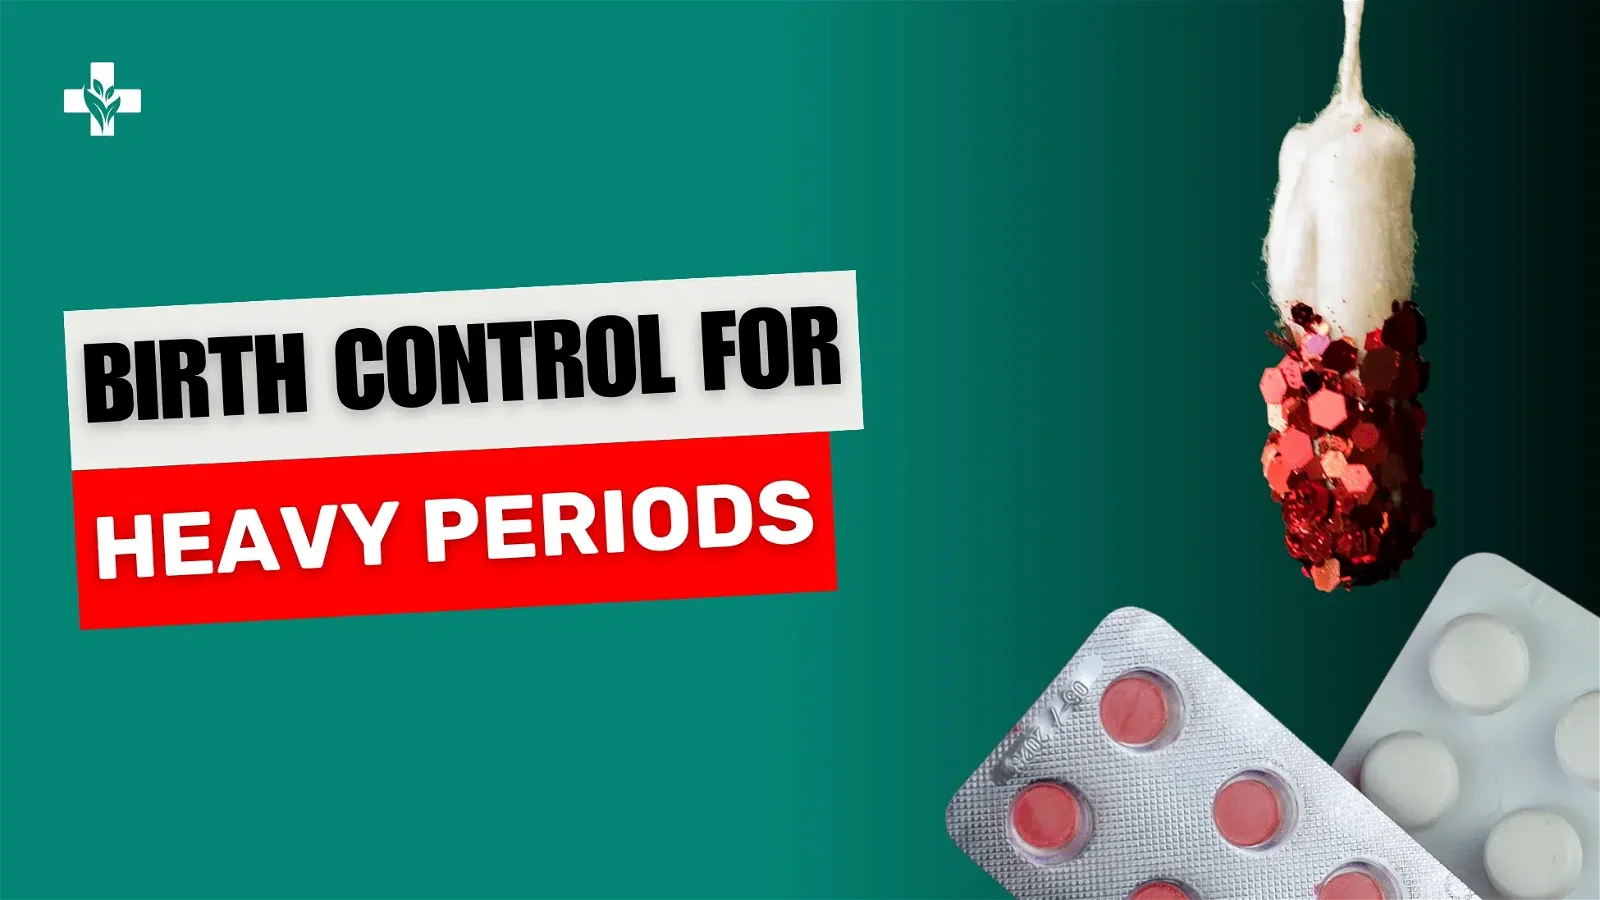 Birth control for heavy periods